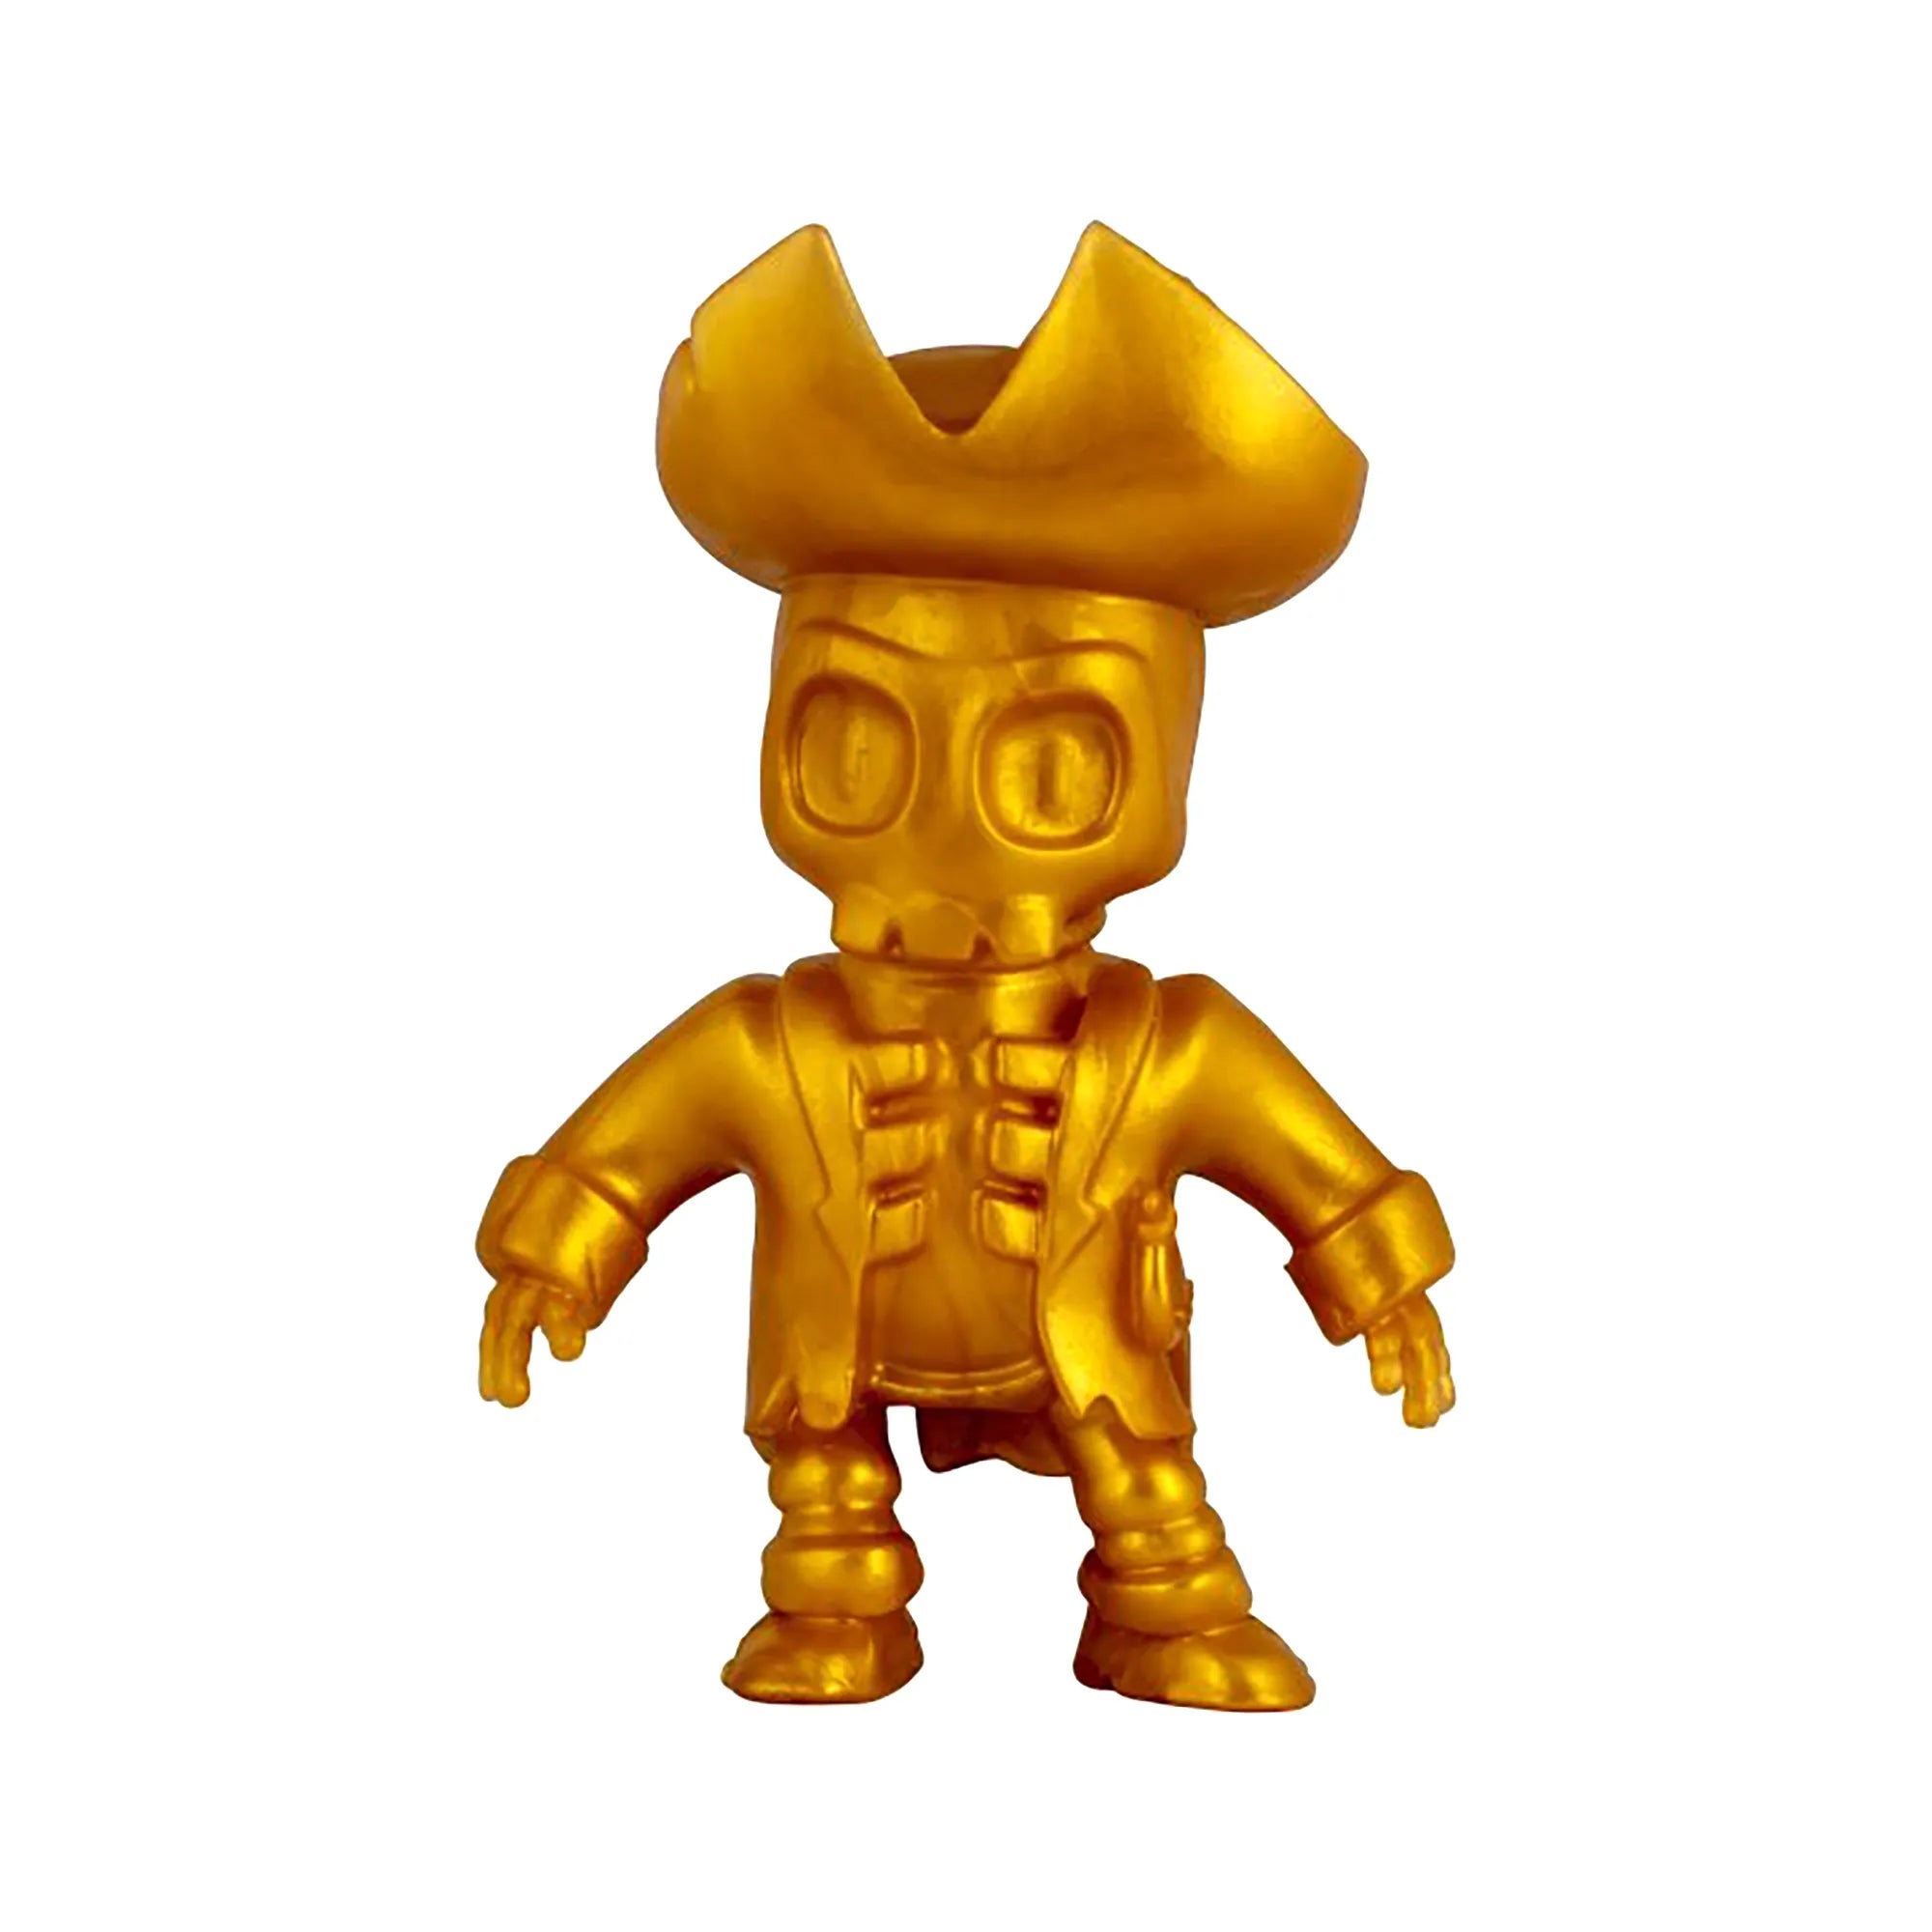 Stumble Guys Monster Flex - Capt. Goldheart - Special Chrome Collectible - Ages 6-Adult - Brown's Hobby & Game